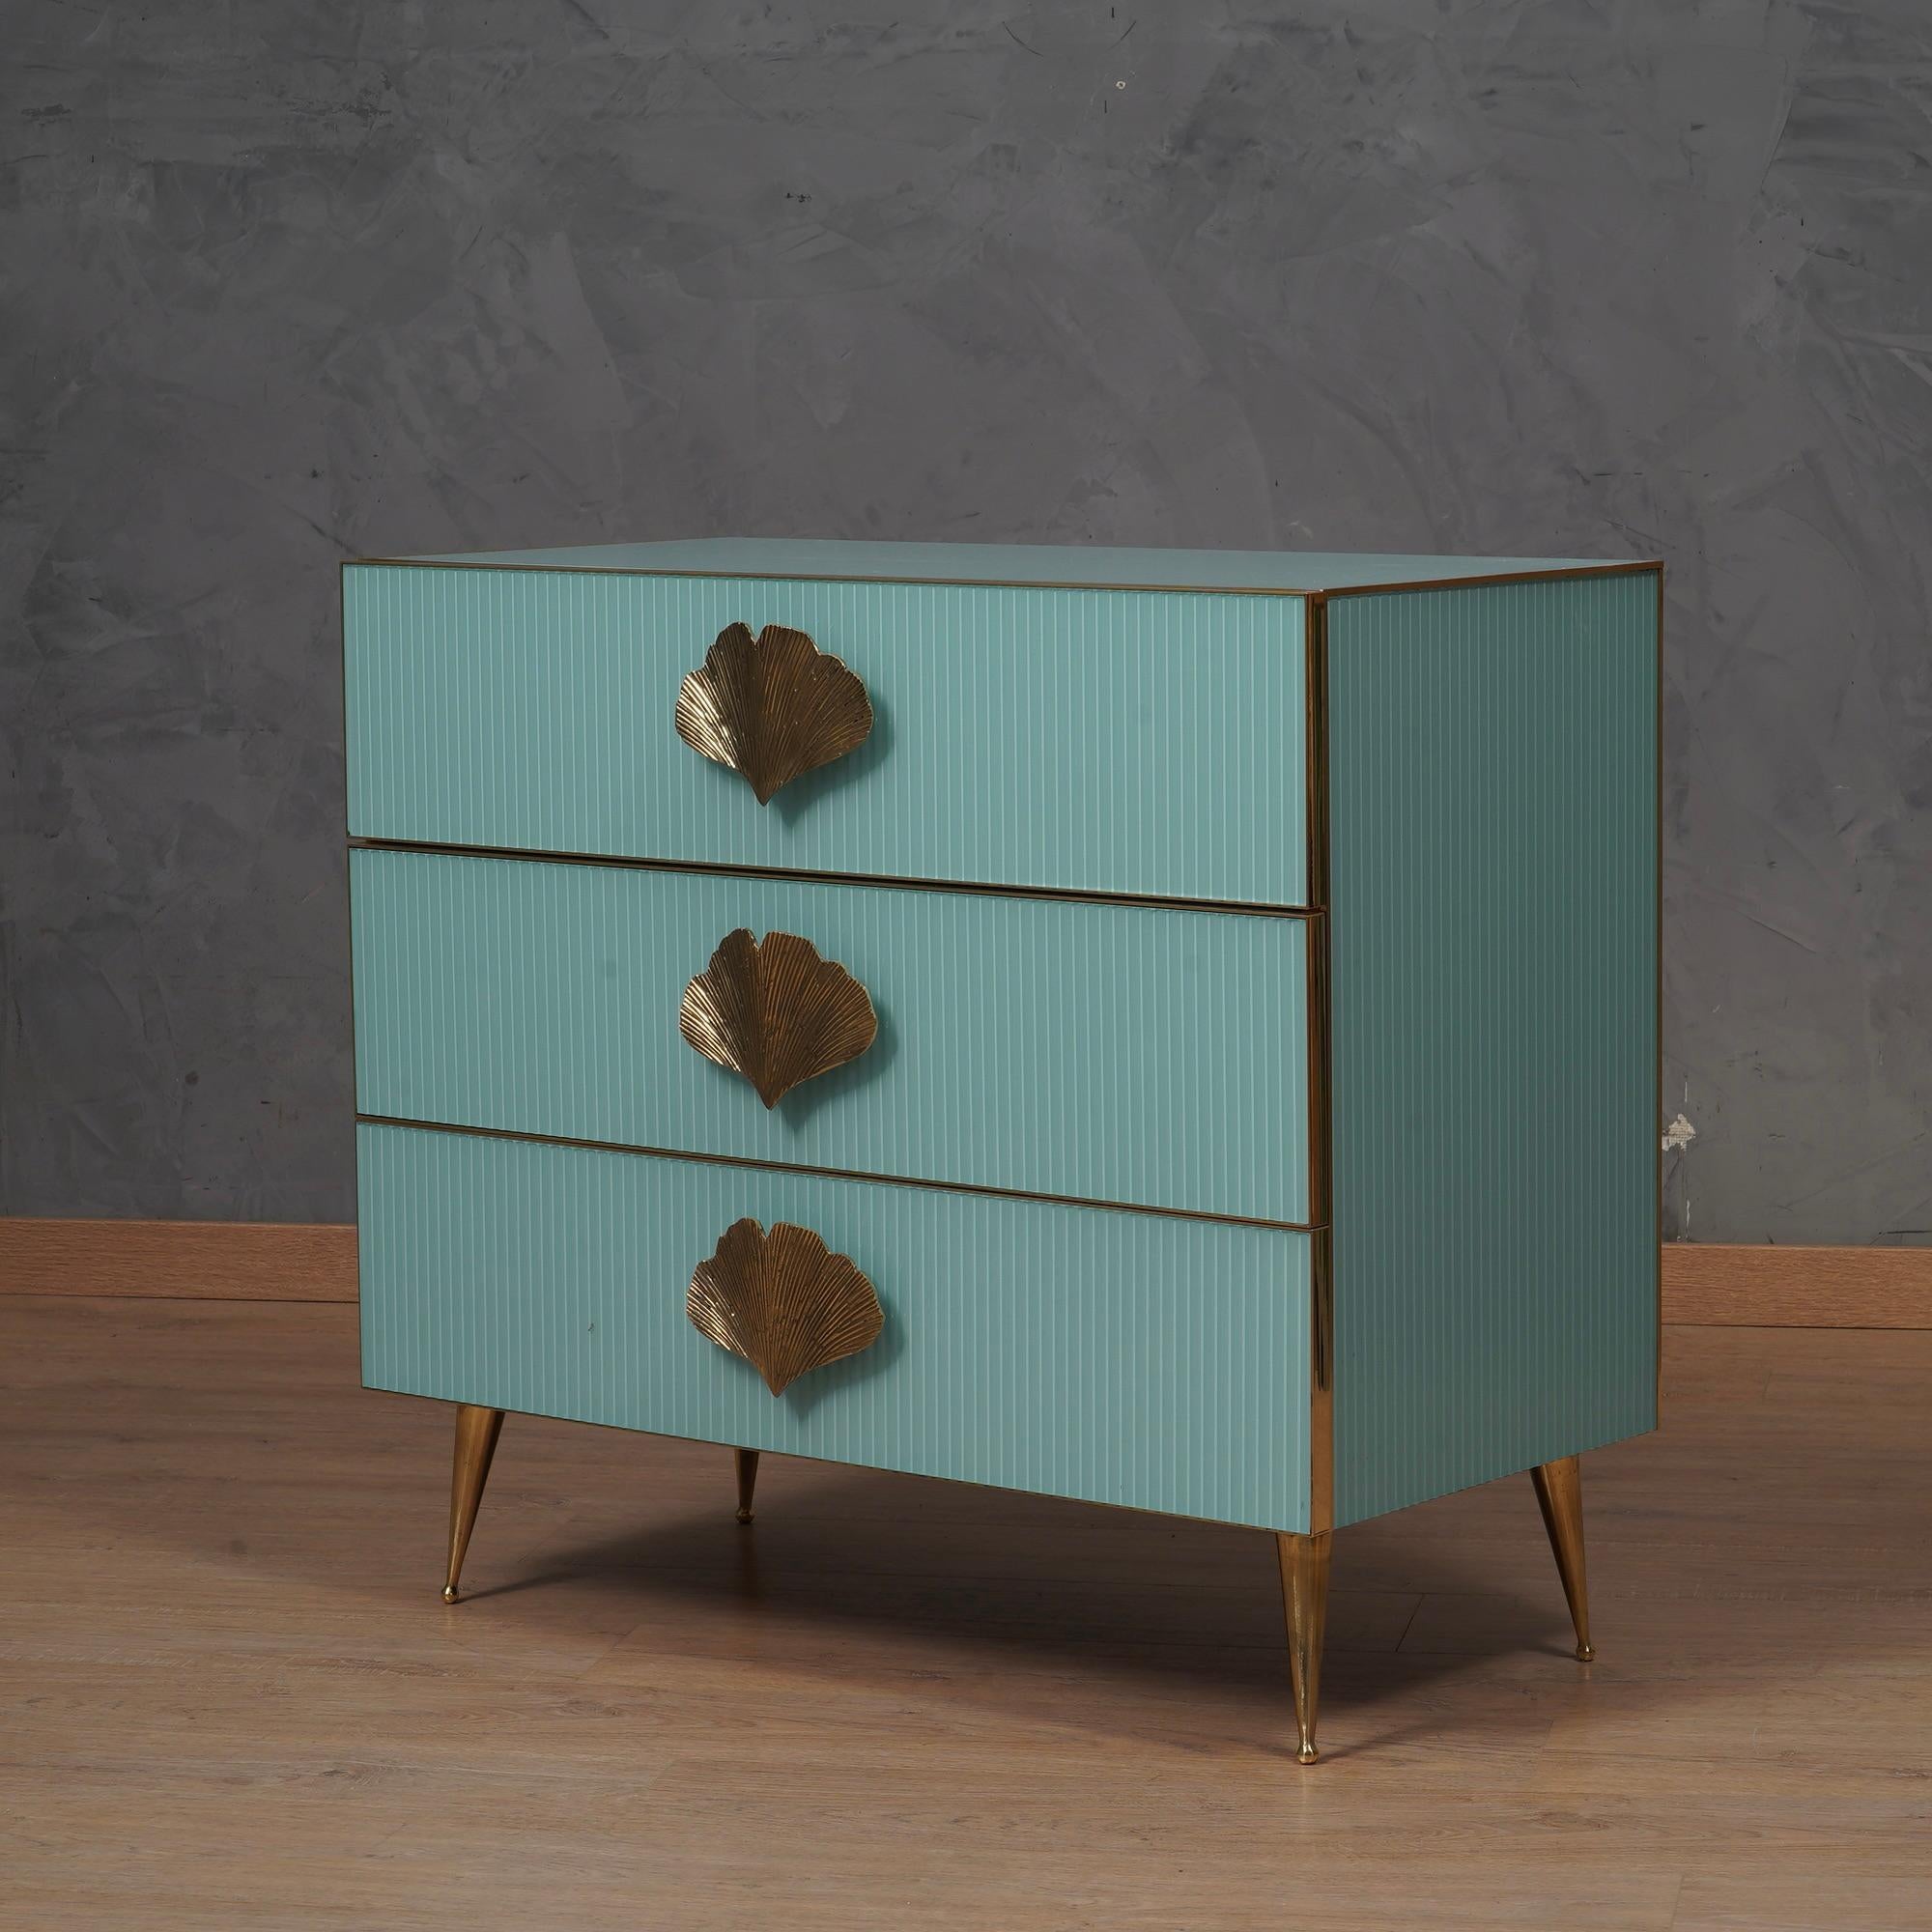 An unmistakable piece of furniture due to its light blue color, it exemplifies timeless design and exceptional craftsmanship. With the unique characteristics of fluted glass and meticulous attention to detail, this chest of drawers testifies to a